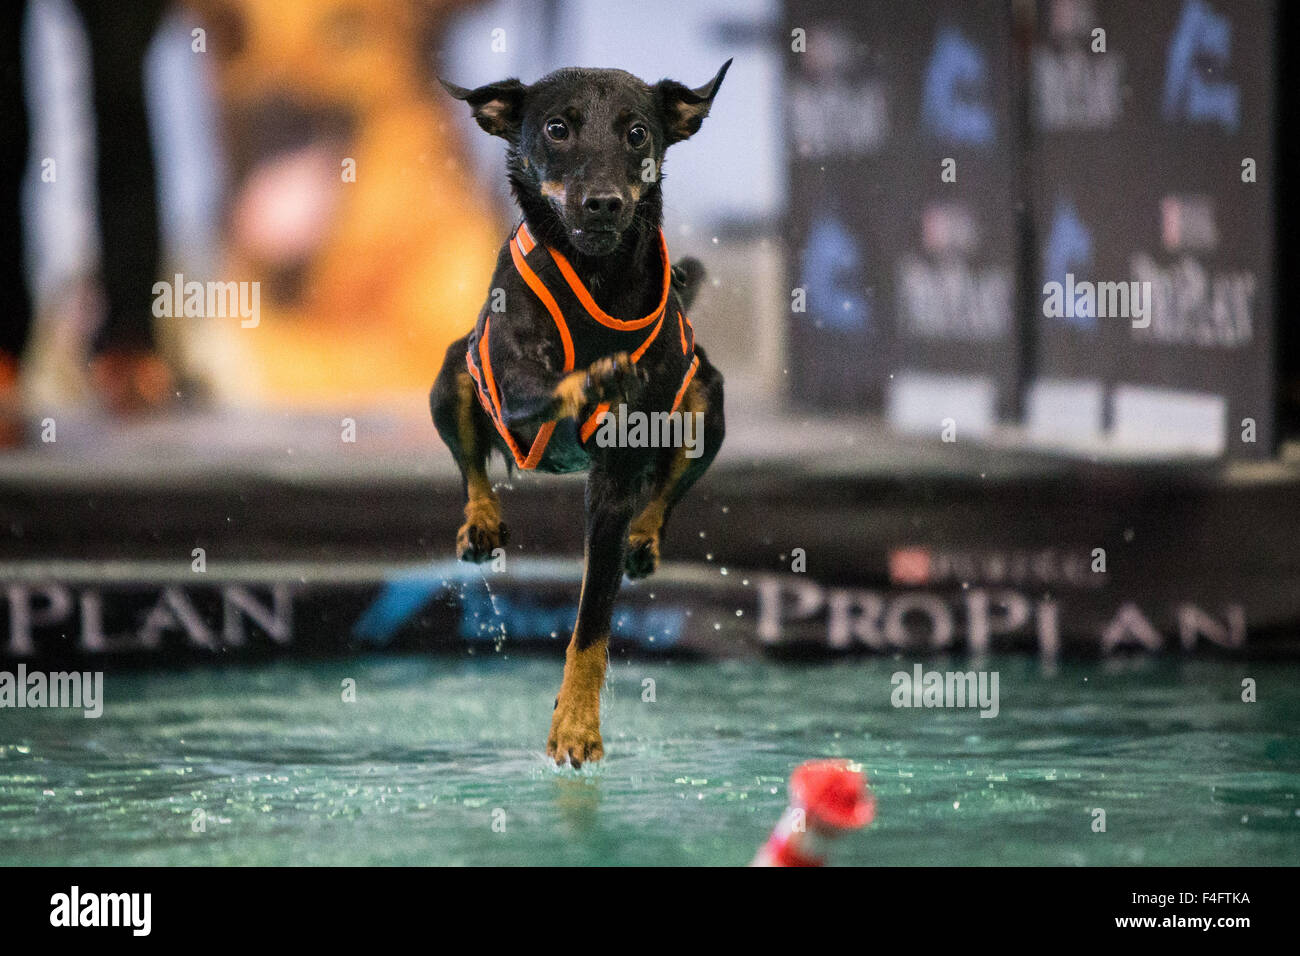 Dortmund, Germany. 16th Oct, 2015. A German Jagdterrier leaps into the water during the dog diving competition of the fair 'Hund & Pferd' (lit. Dog & Horse) in Dortmund, Germany, 16 October 2015. The fair that runs from 16 to 18 October 2015 includes events such as the International Dog Show. Photo: MAJA HITIJ/dpa/Alamy Live News Stock Photo